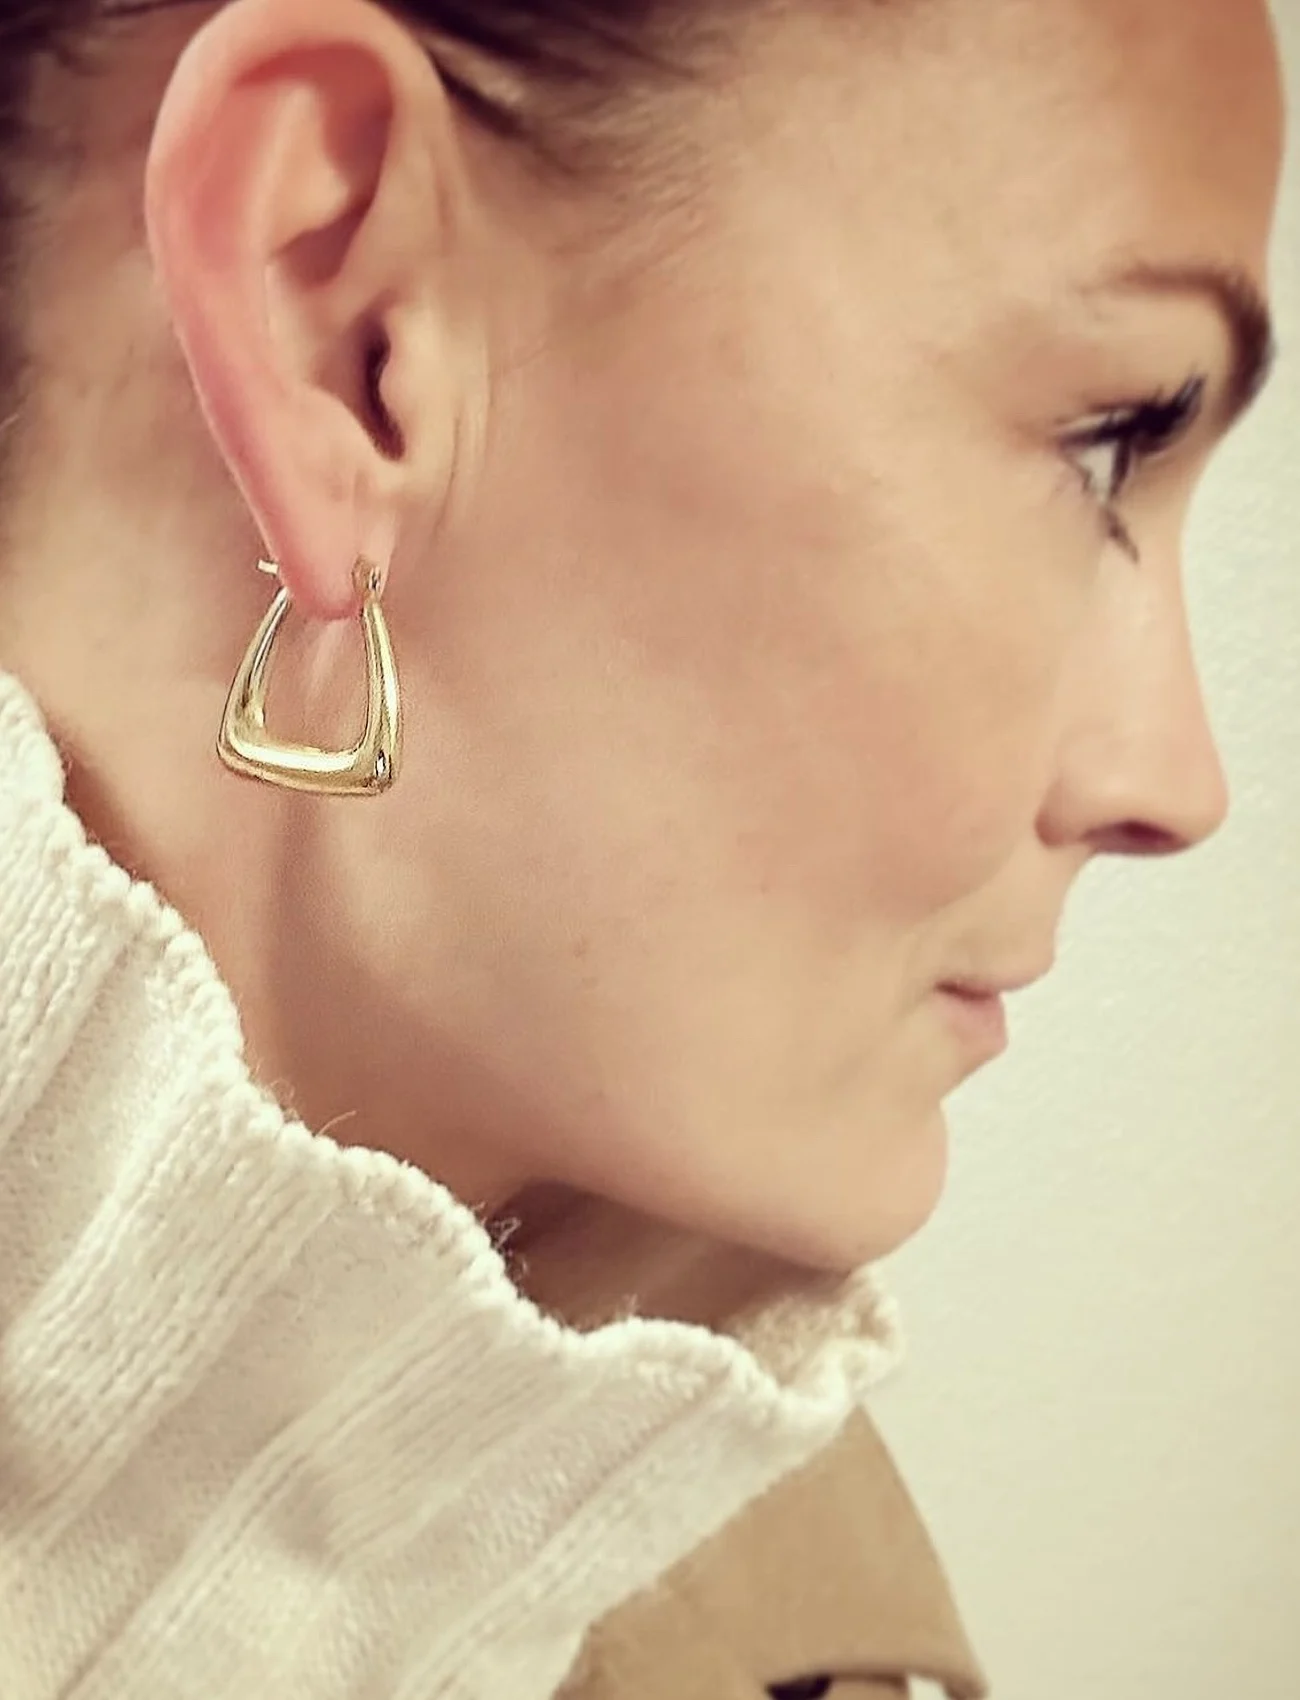 Bud to rose - Bowie Earring - hopen - gold - 1